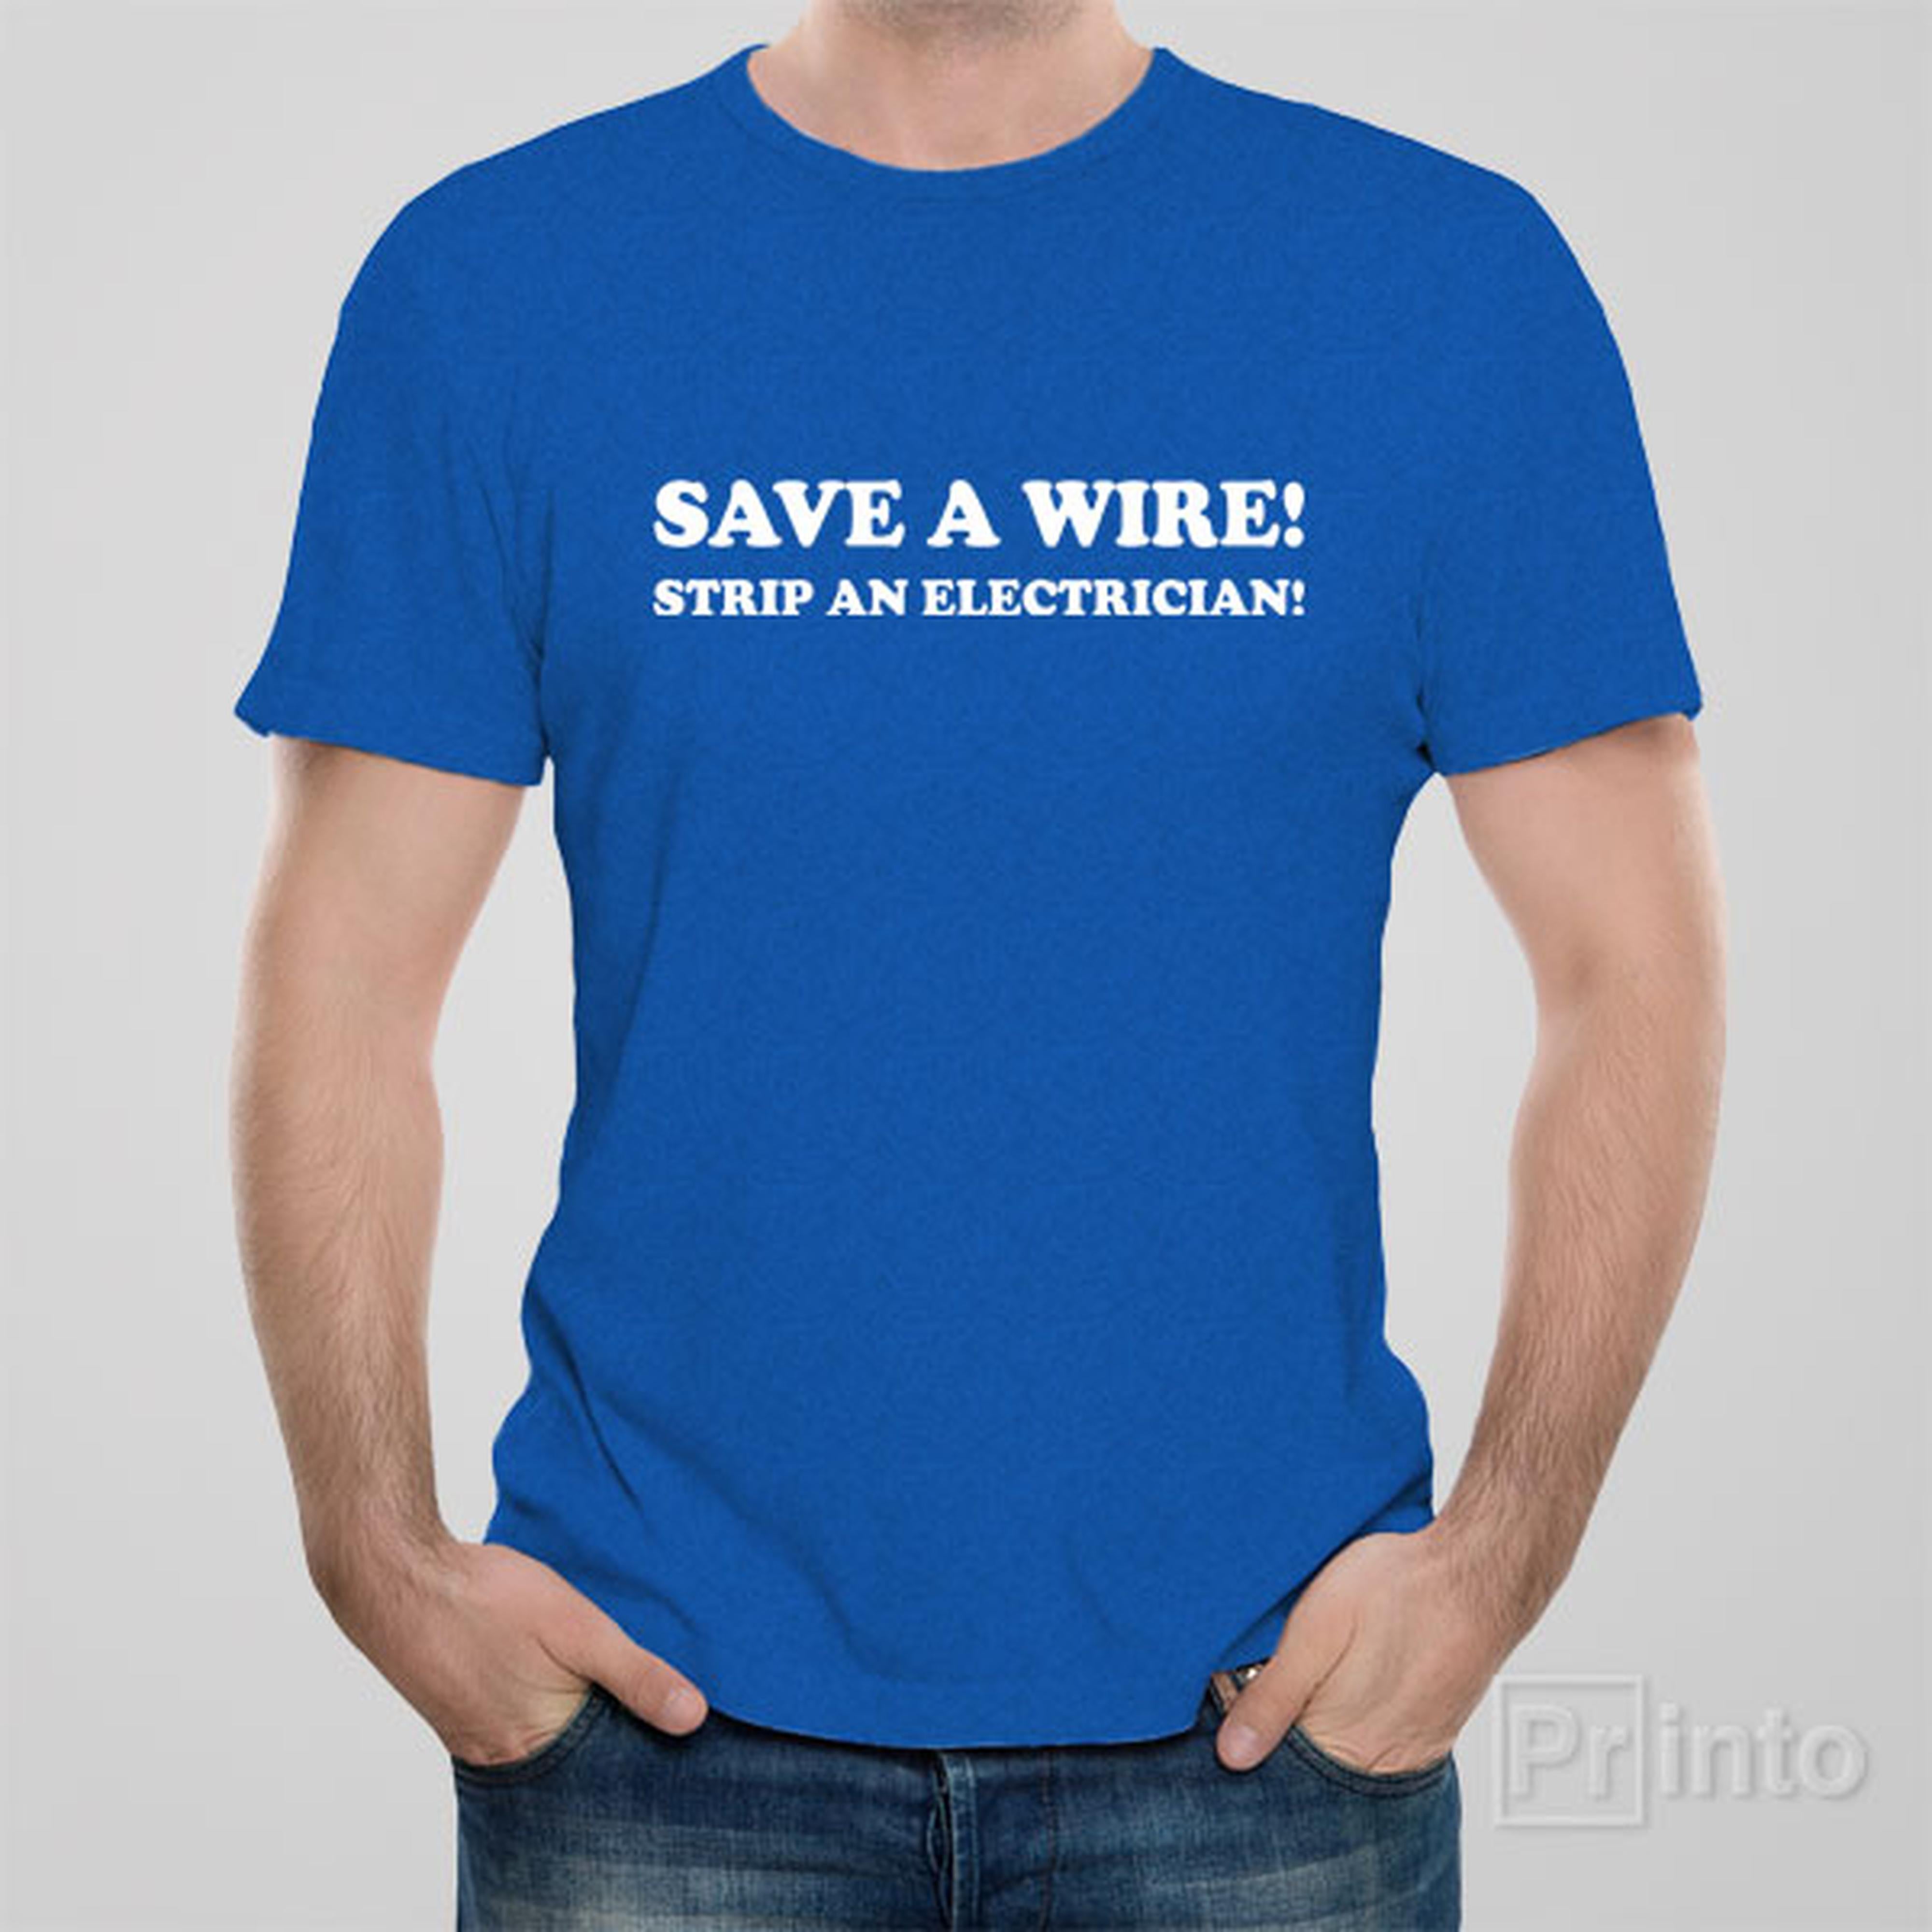 save-a-wire-strip-an-electrician-t-shirt